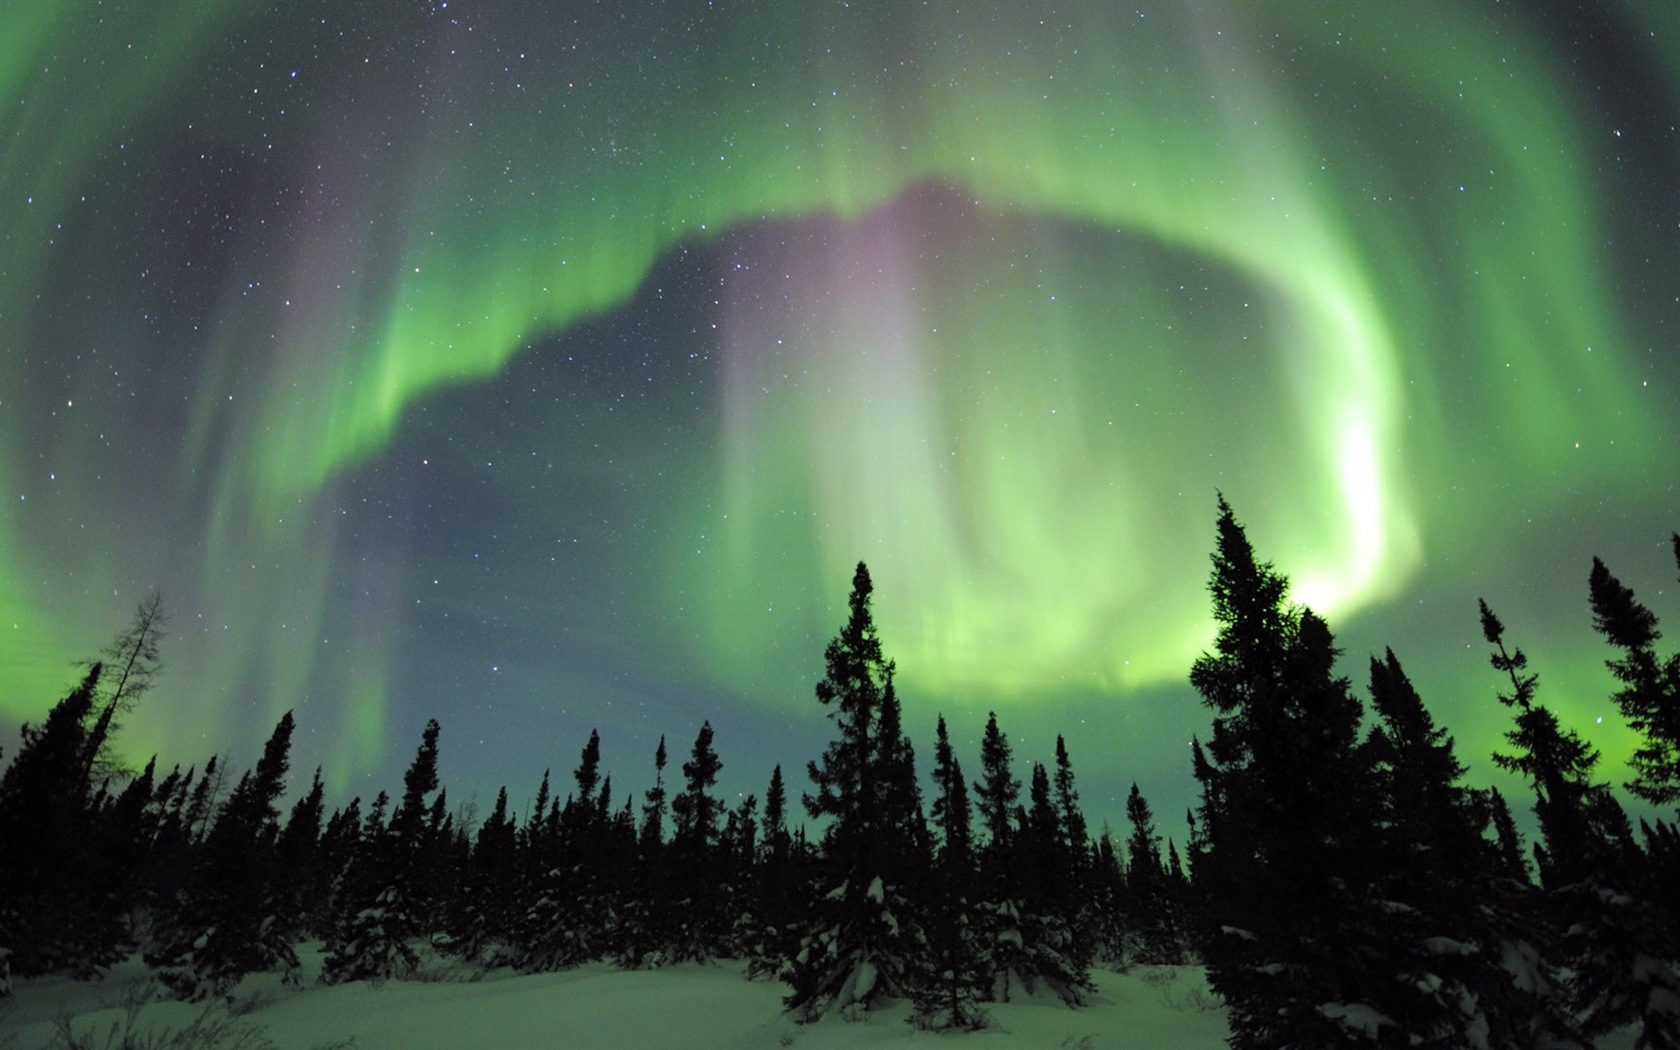 Natural wonders of the Northern Lights HD Wallpaper (2) #9 - 1680x1050